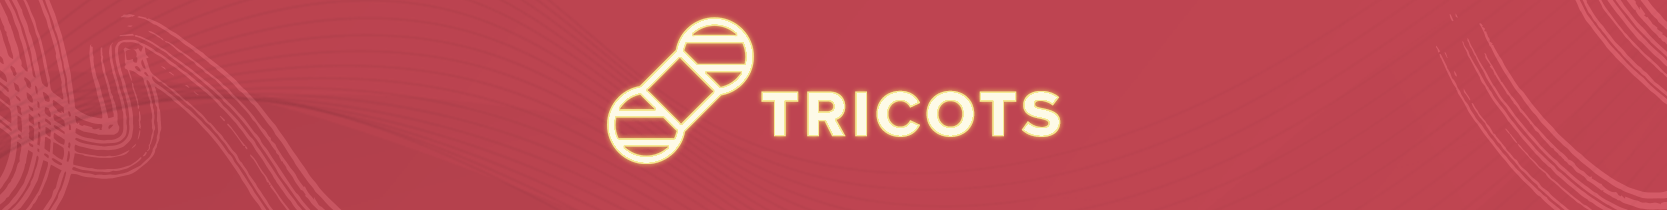 Tricots
